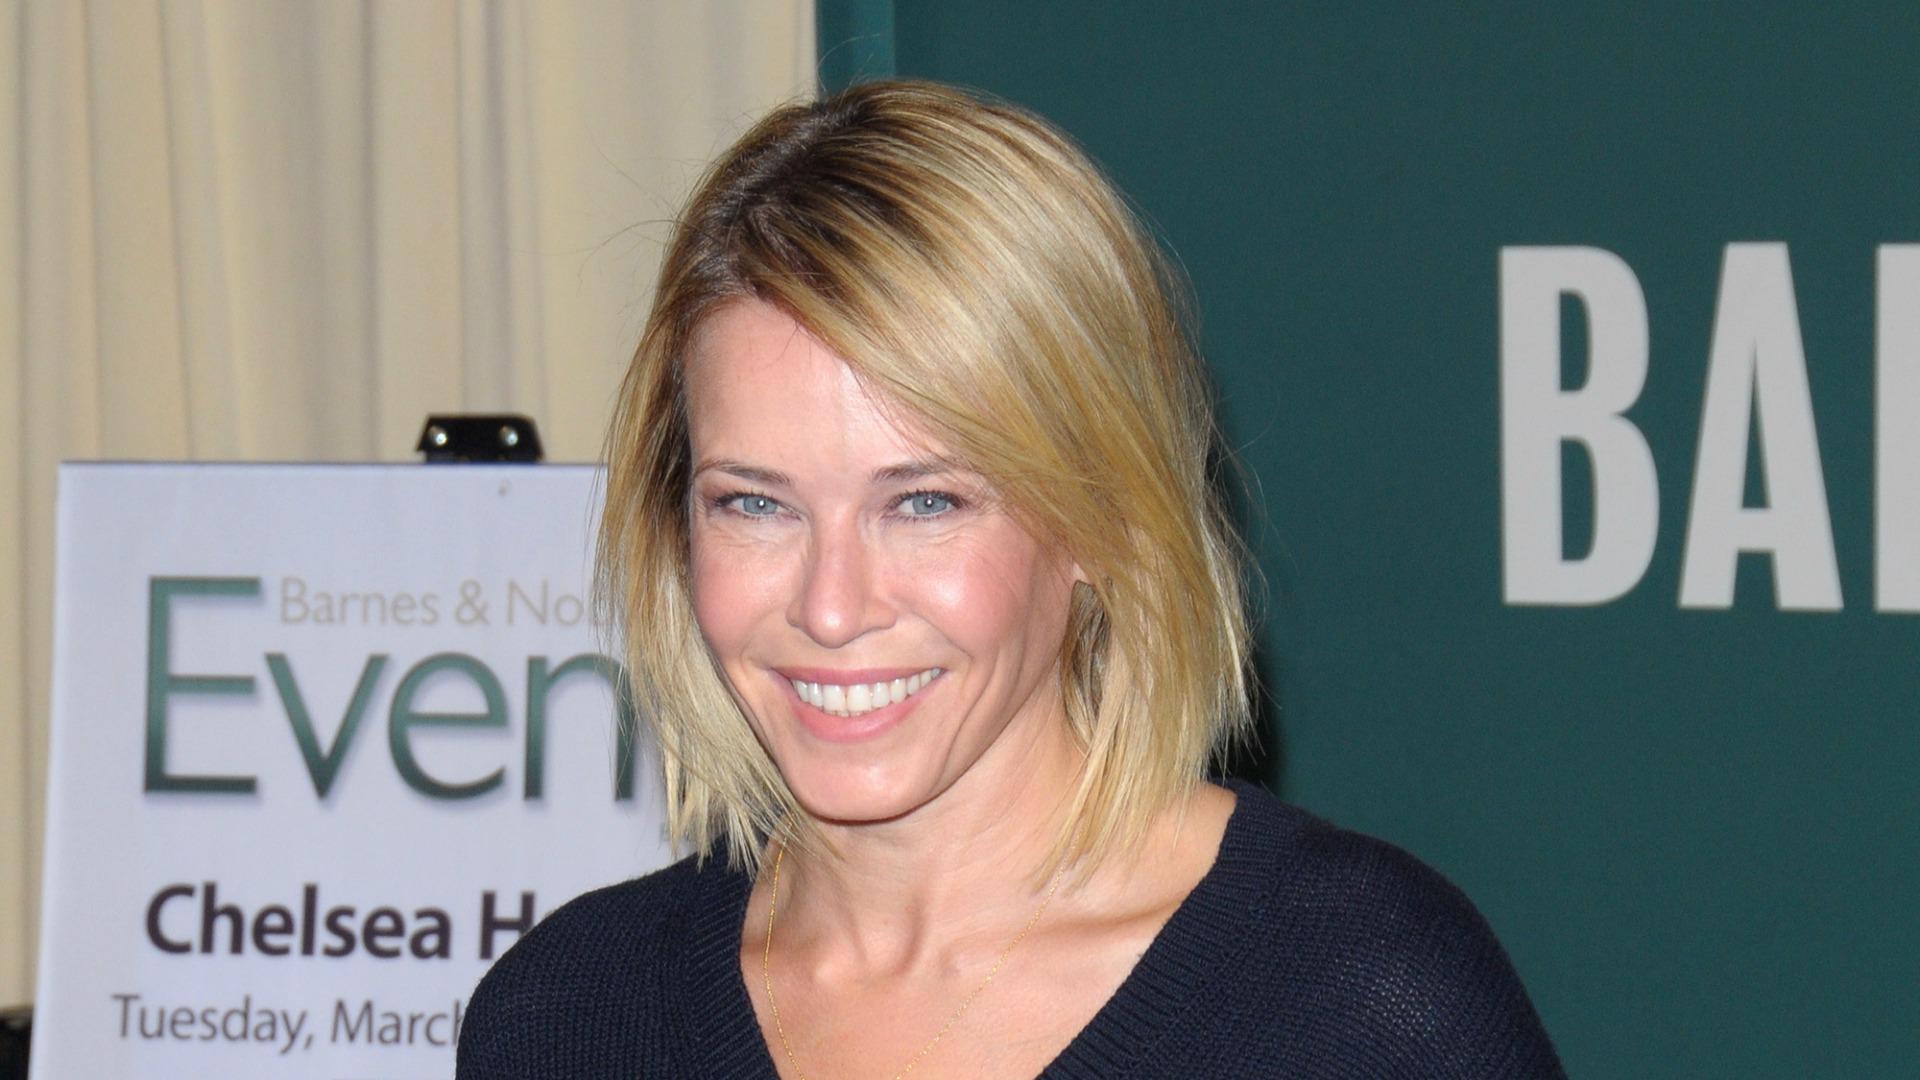 E! Says Buh Bye To Chelsea Handler Four Months Early